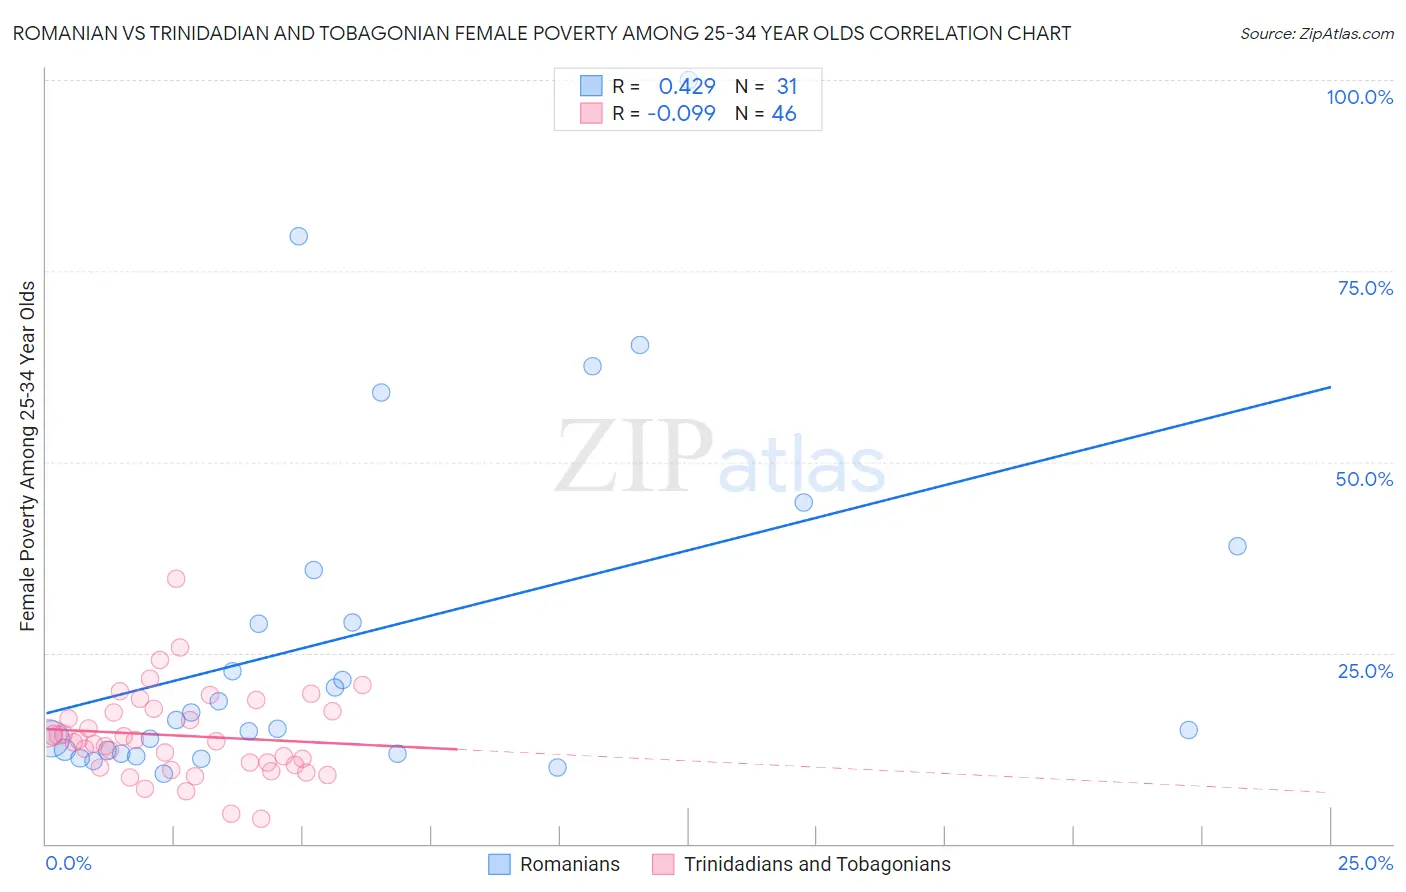 Romanian vs Trinidadian and Tobagonian Female Poverty Among 25-34 Year Olds